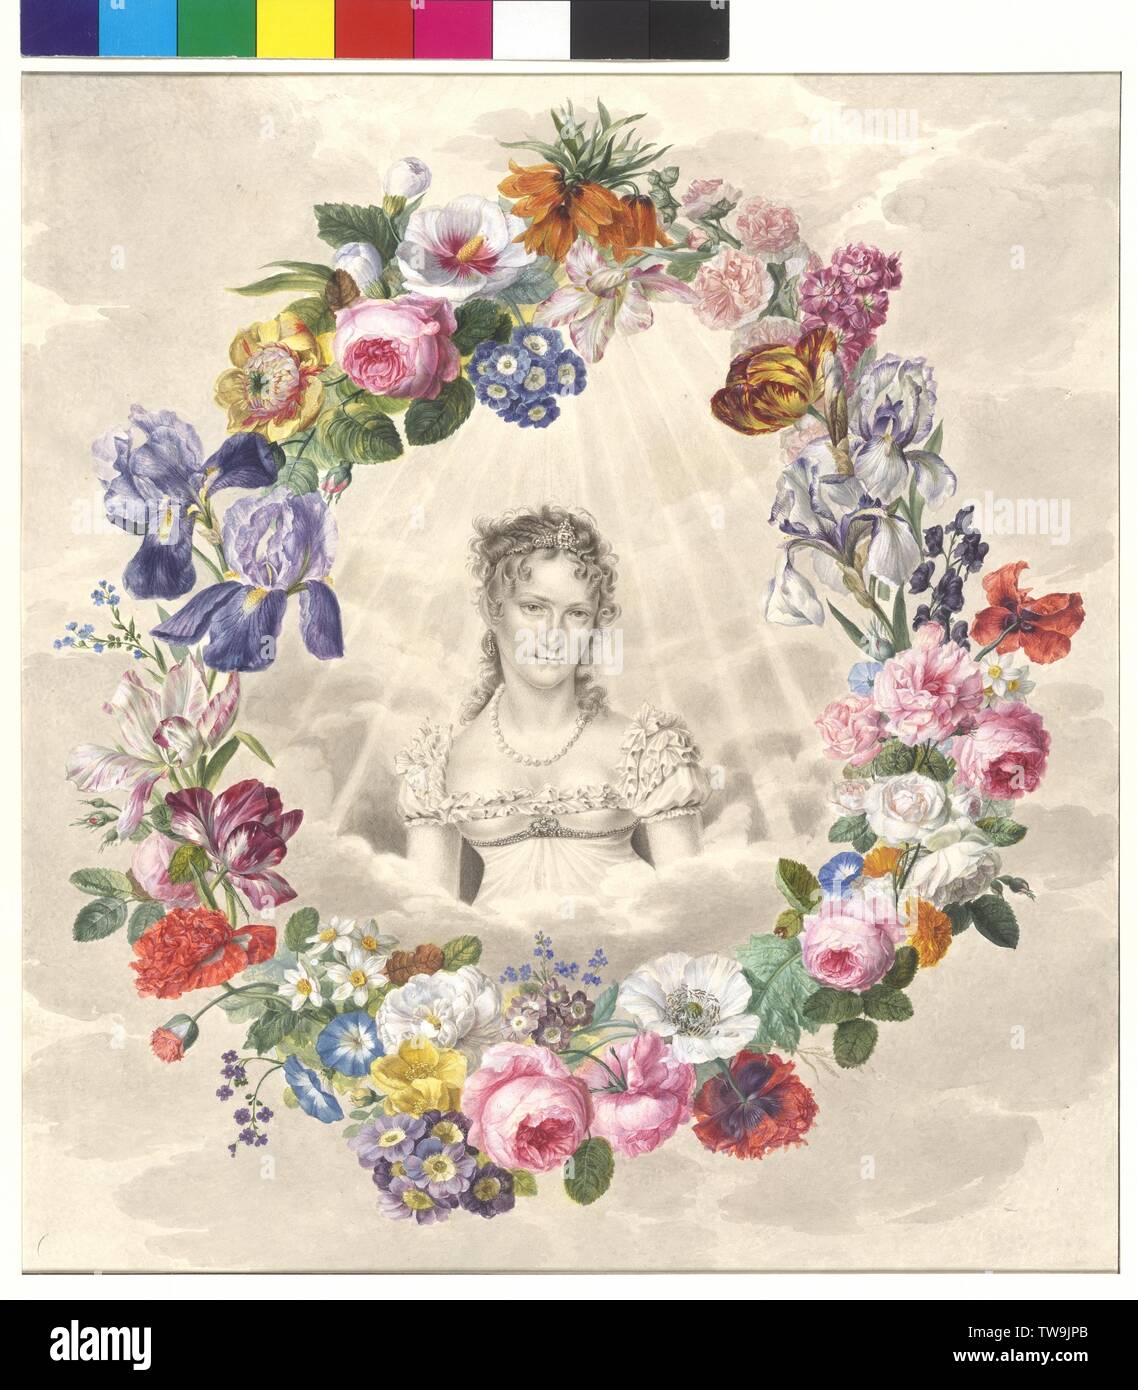 empress Caroline Auguste in the wreath, Huldigungsblatt at at the empress, Portrait of the empress based on a engraving by Blaise Hoefel, surround by of a Kranz flowers. watercolour, highlights in opaque white von Johann Henry Henning, the sheet 1827 in a private audience at Emperor Franz surrender on the reverse side designate: J. H. Hennig / Hofprak, Additional-Rights-Clearance-Info-Not-Available Stock Photo